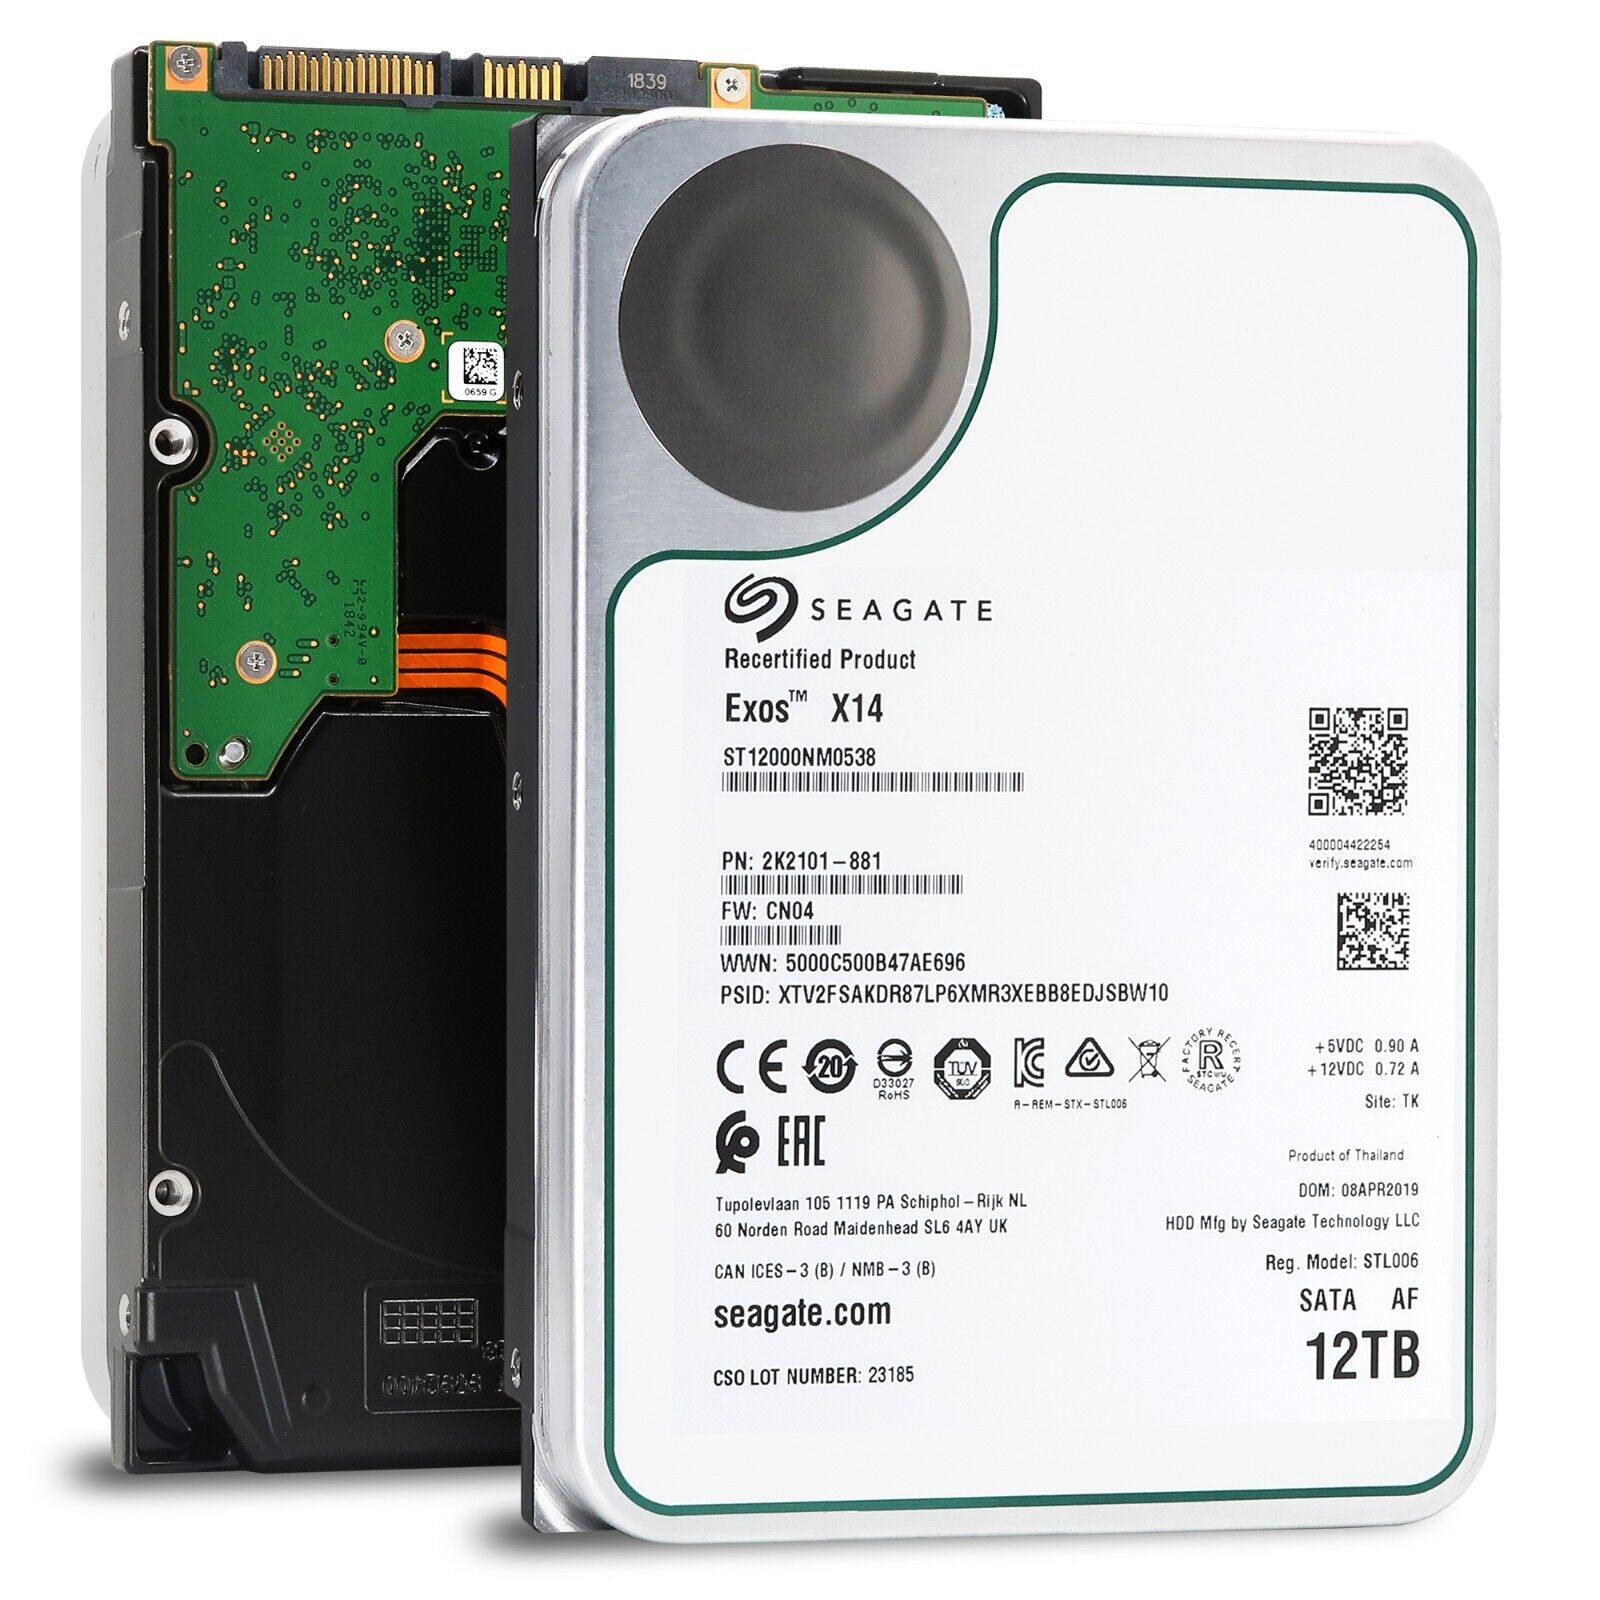 Seagate 12TB Exos X14 SATA 6Gb/s 7200RPM Enterprise HDD — ST12000NM0538. Available Now for $87.99